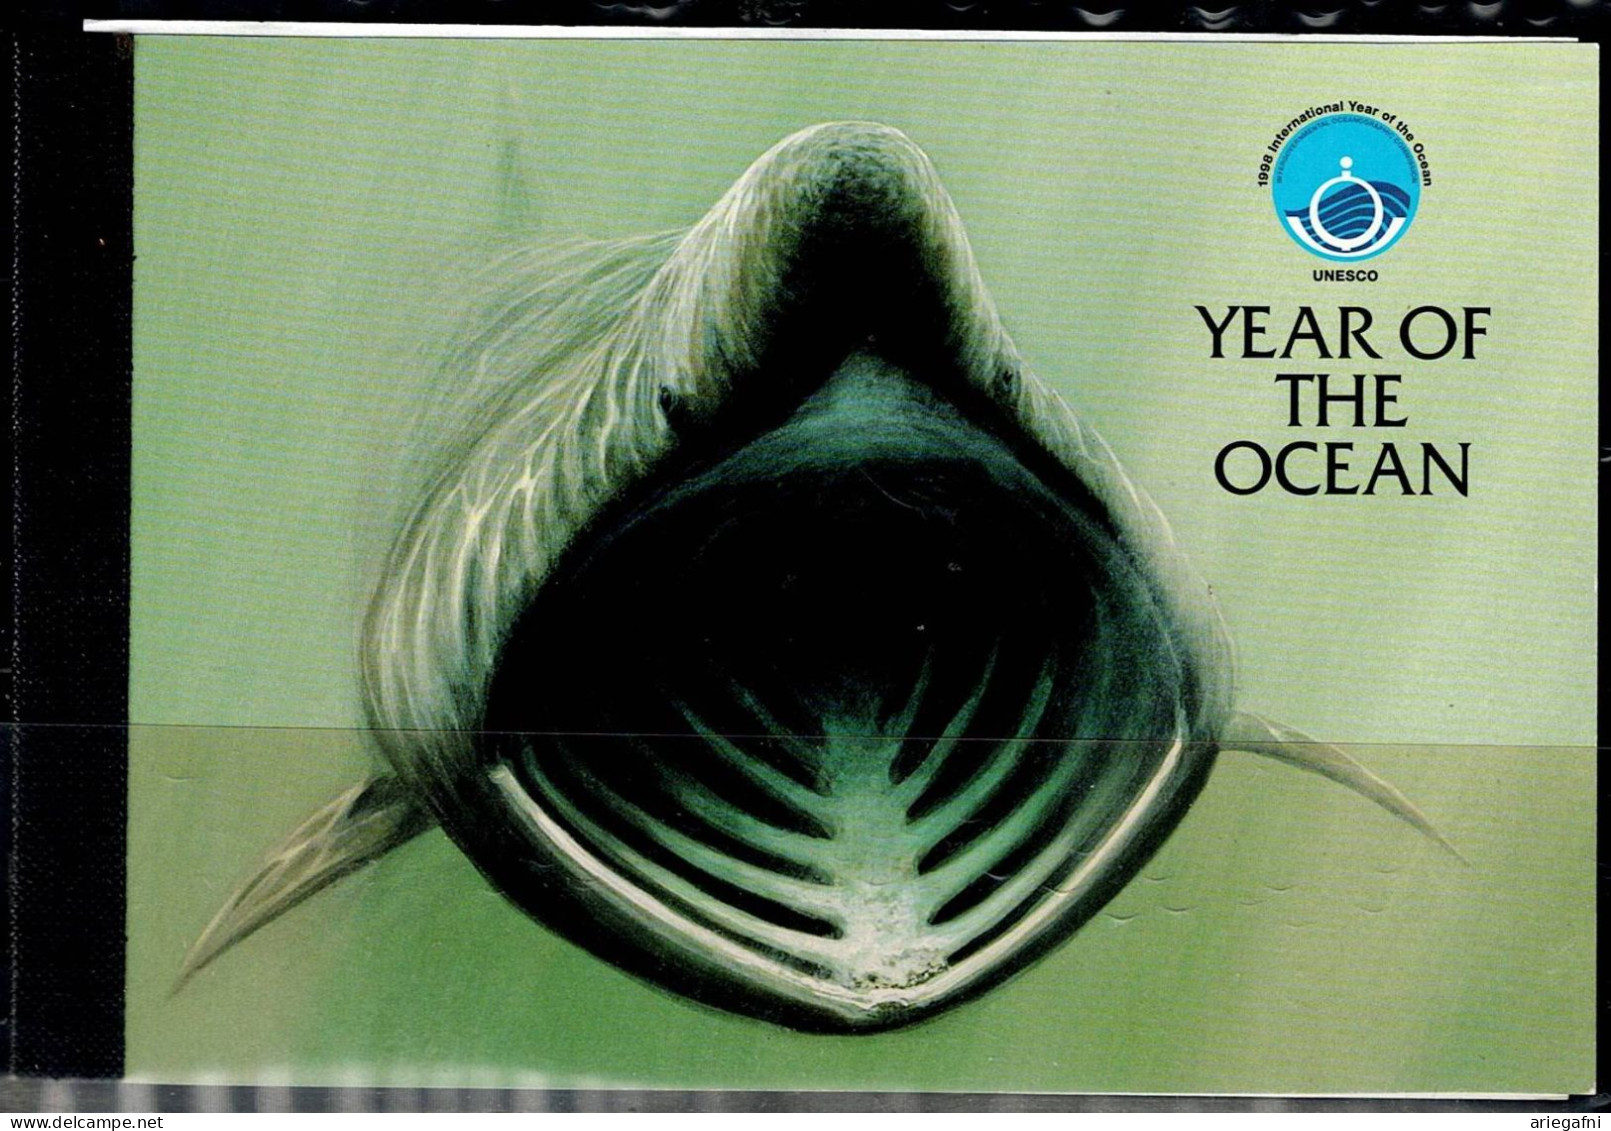 ISLE OF MAN 1998 UNESCO INTERNATIONAL YEAR OF THE OCEAN BOOKLET MNH VF!! - Man (Insel)